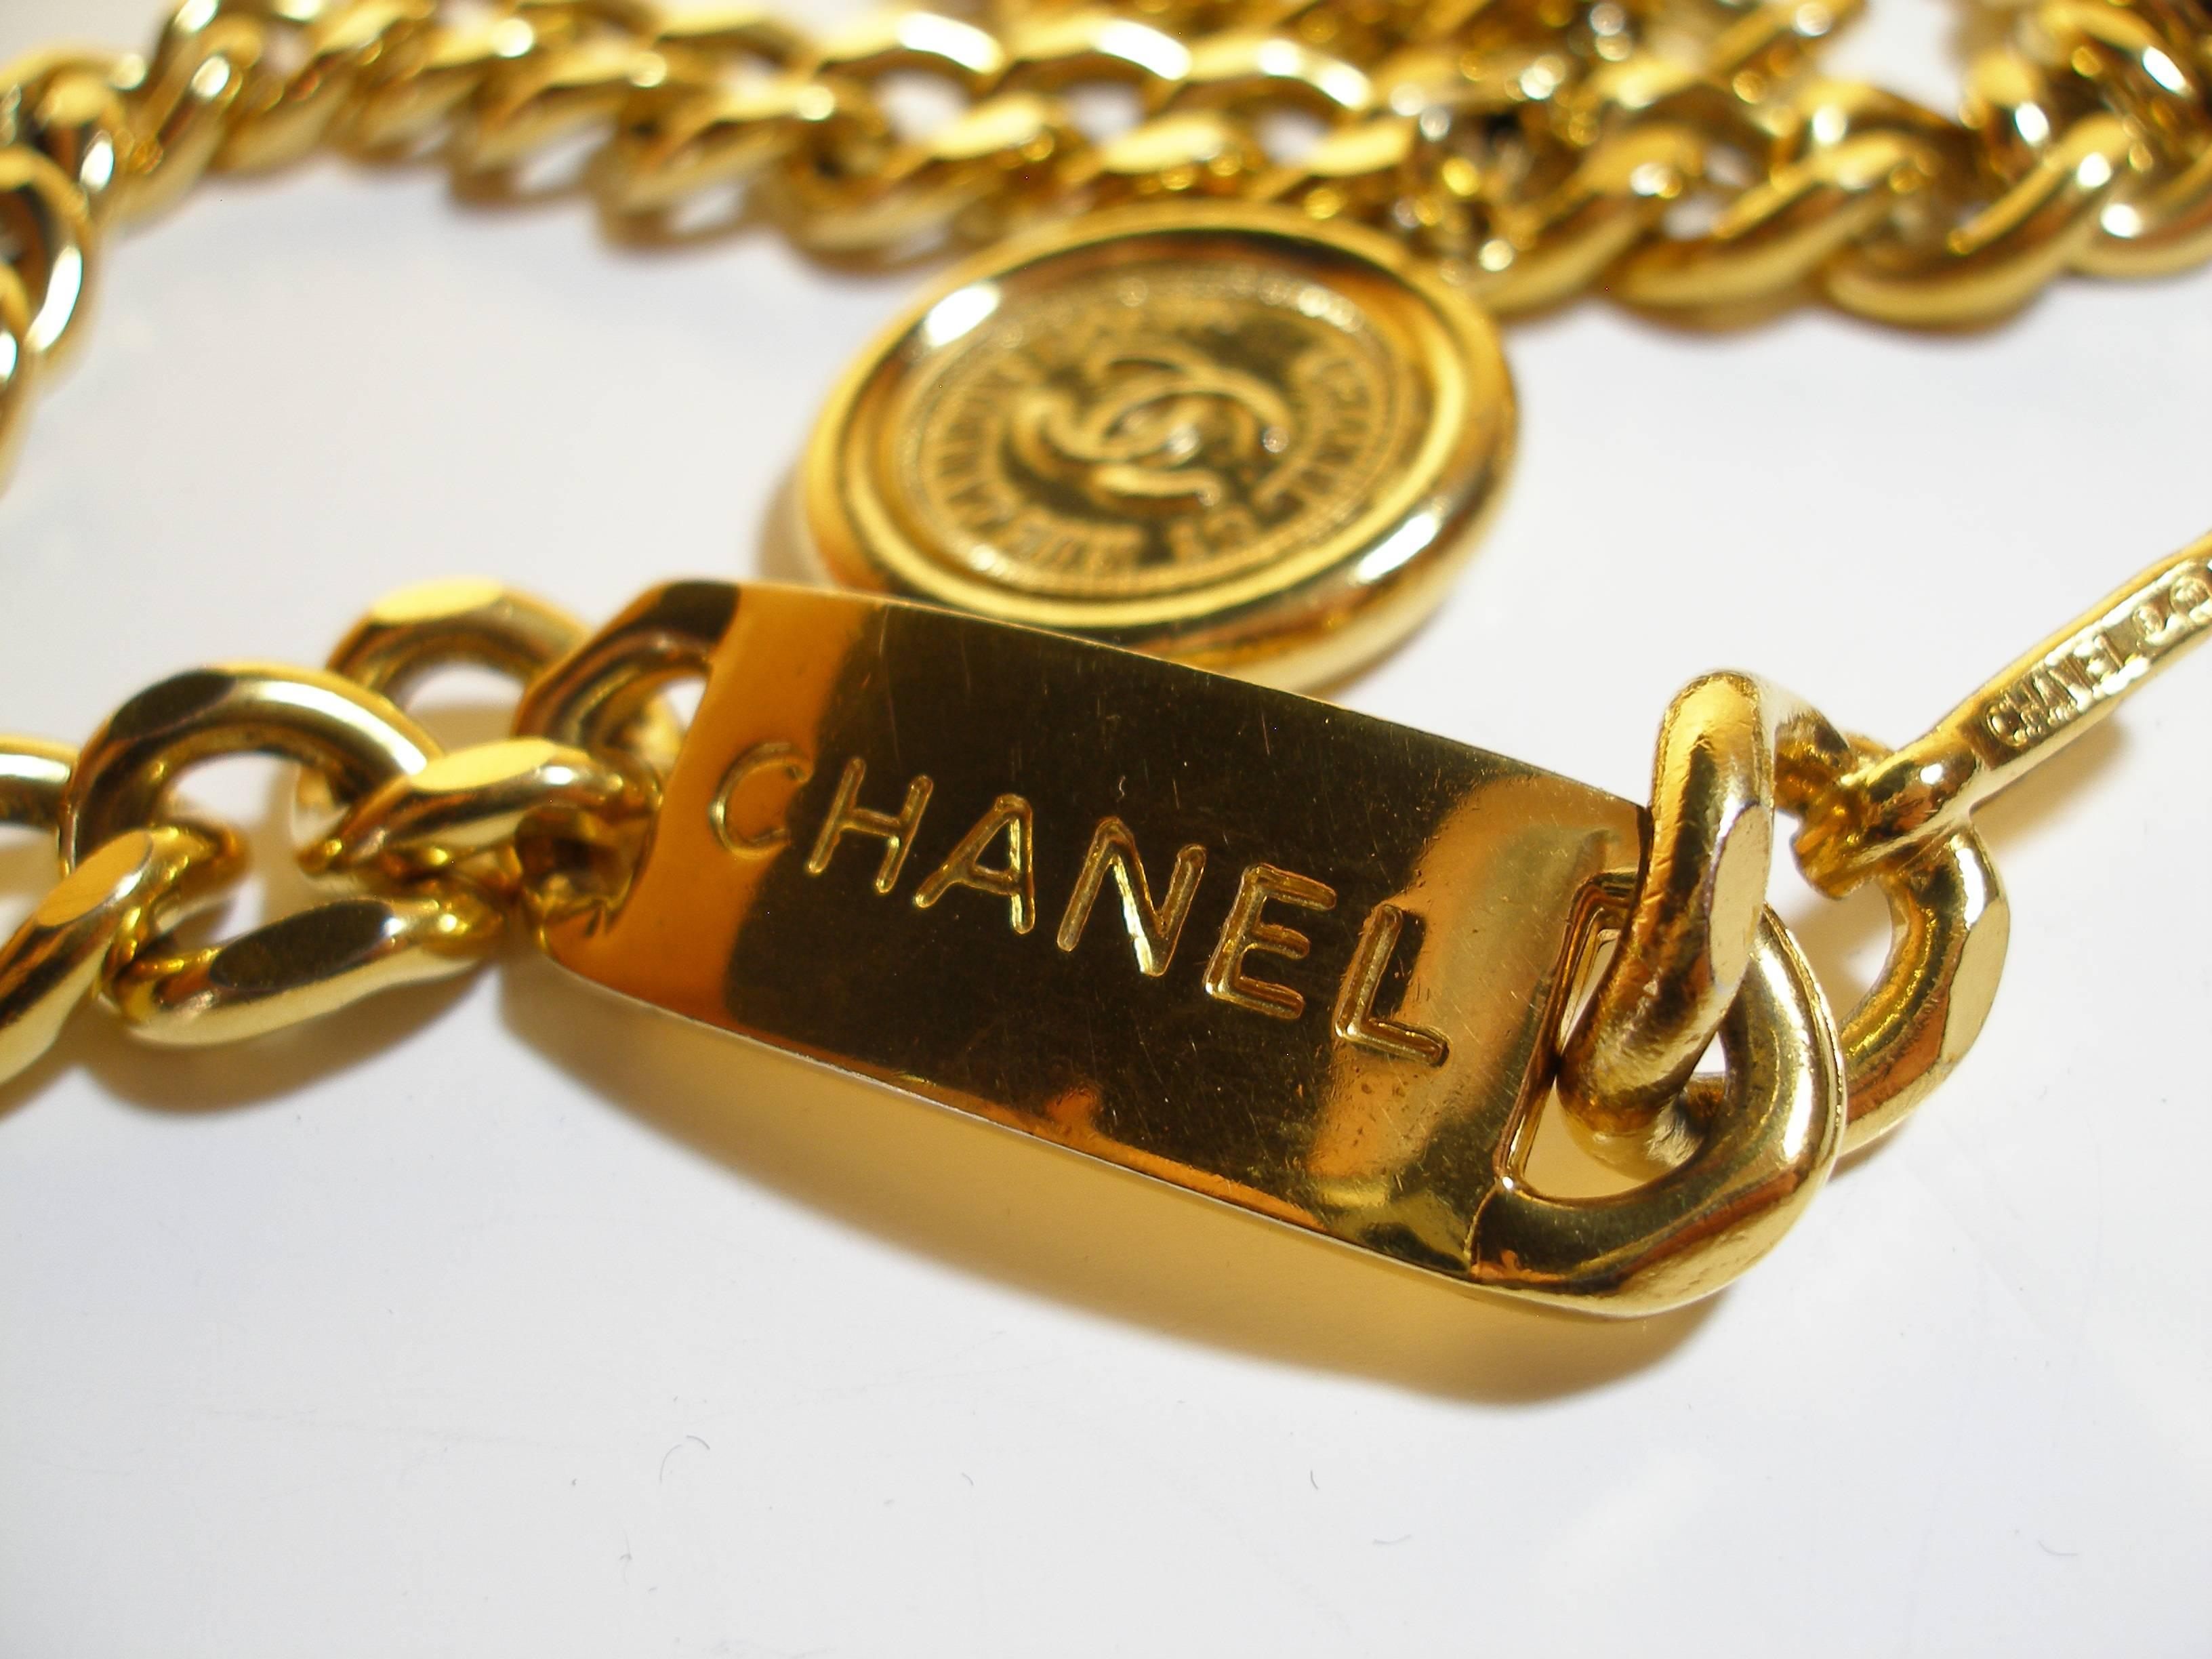  This authentic Chanel Belt in a very gently used condition. This stylish Chanel accessorie is ideal to jazz up any outfit. It is made out of 18k gold plate finish chain and a signature Chanel plate on the front.
Condition : USED
Please look at the